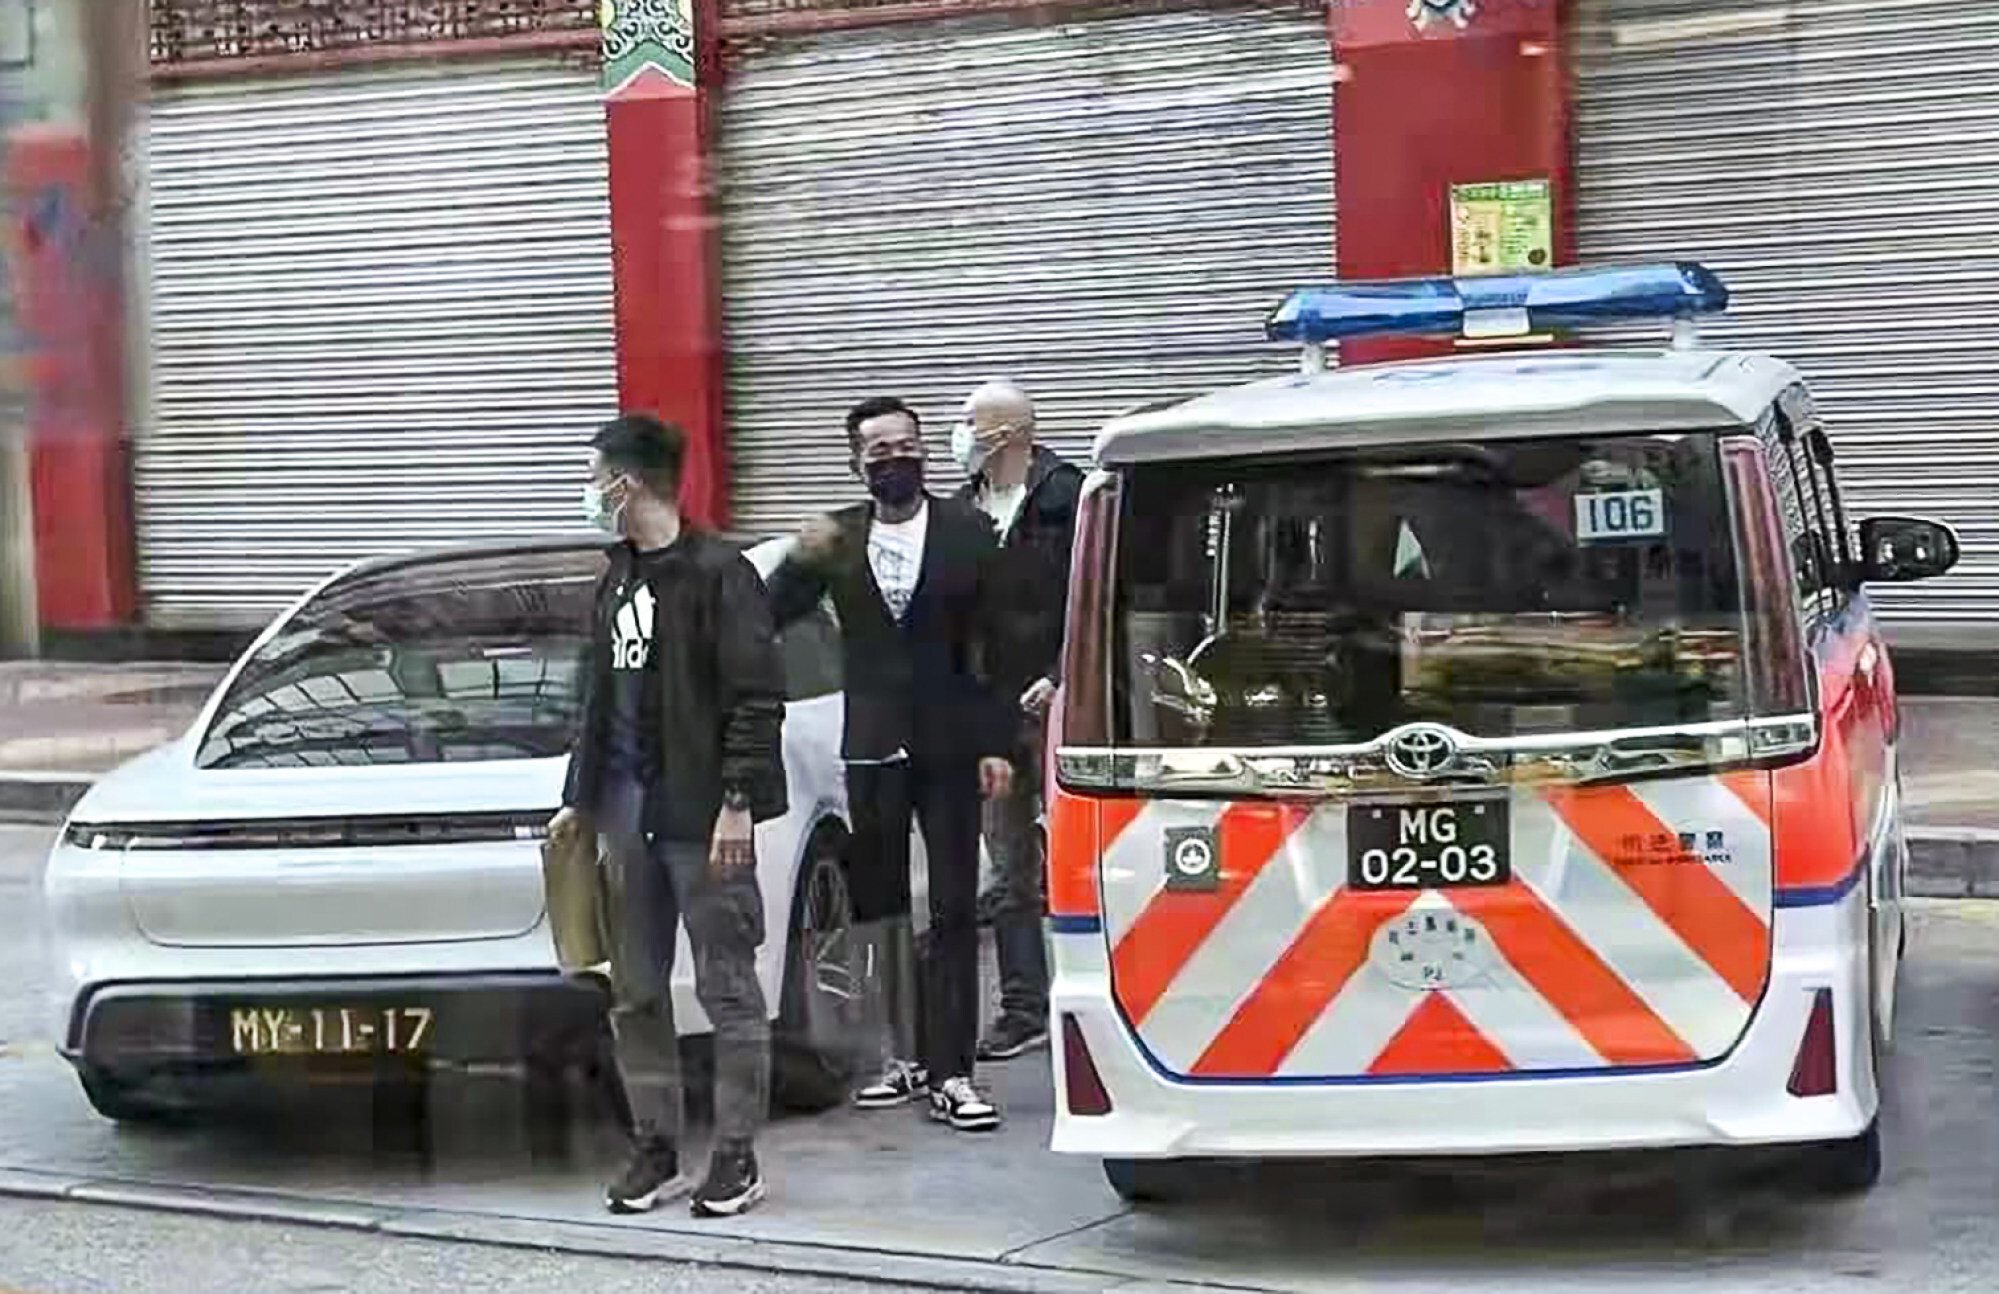 Alvin Chau (centre) is taken in for questioning last week after mainland Chinese authorities issued an arrest warrant over cross-border gambling allegations. Photo: Facebook